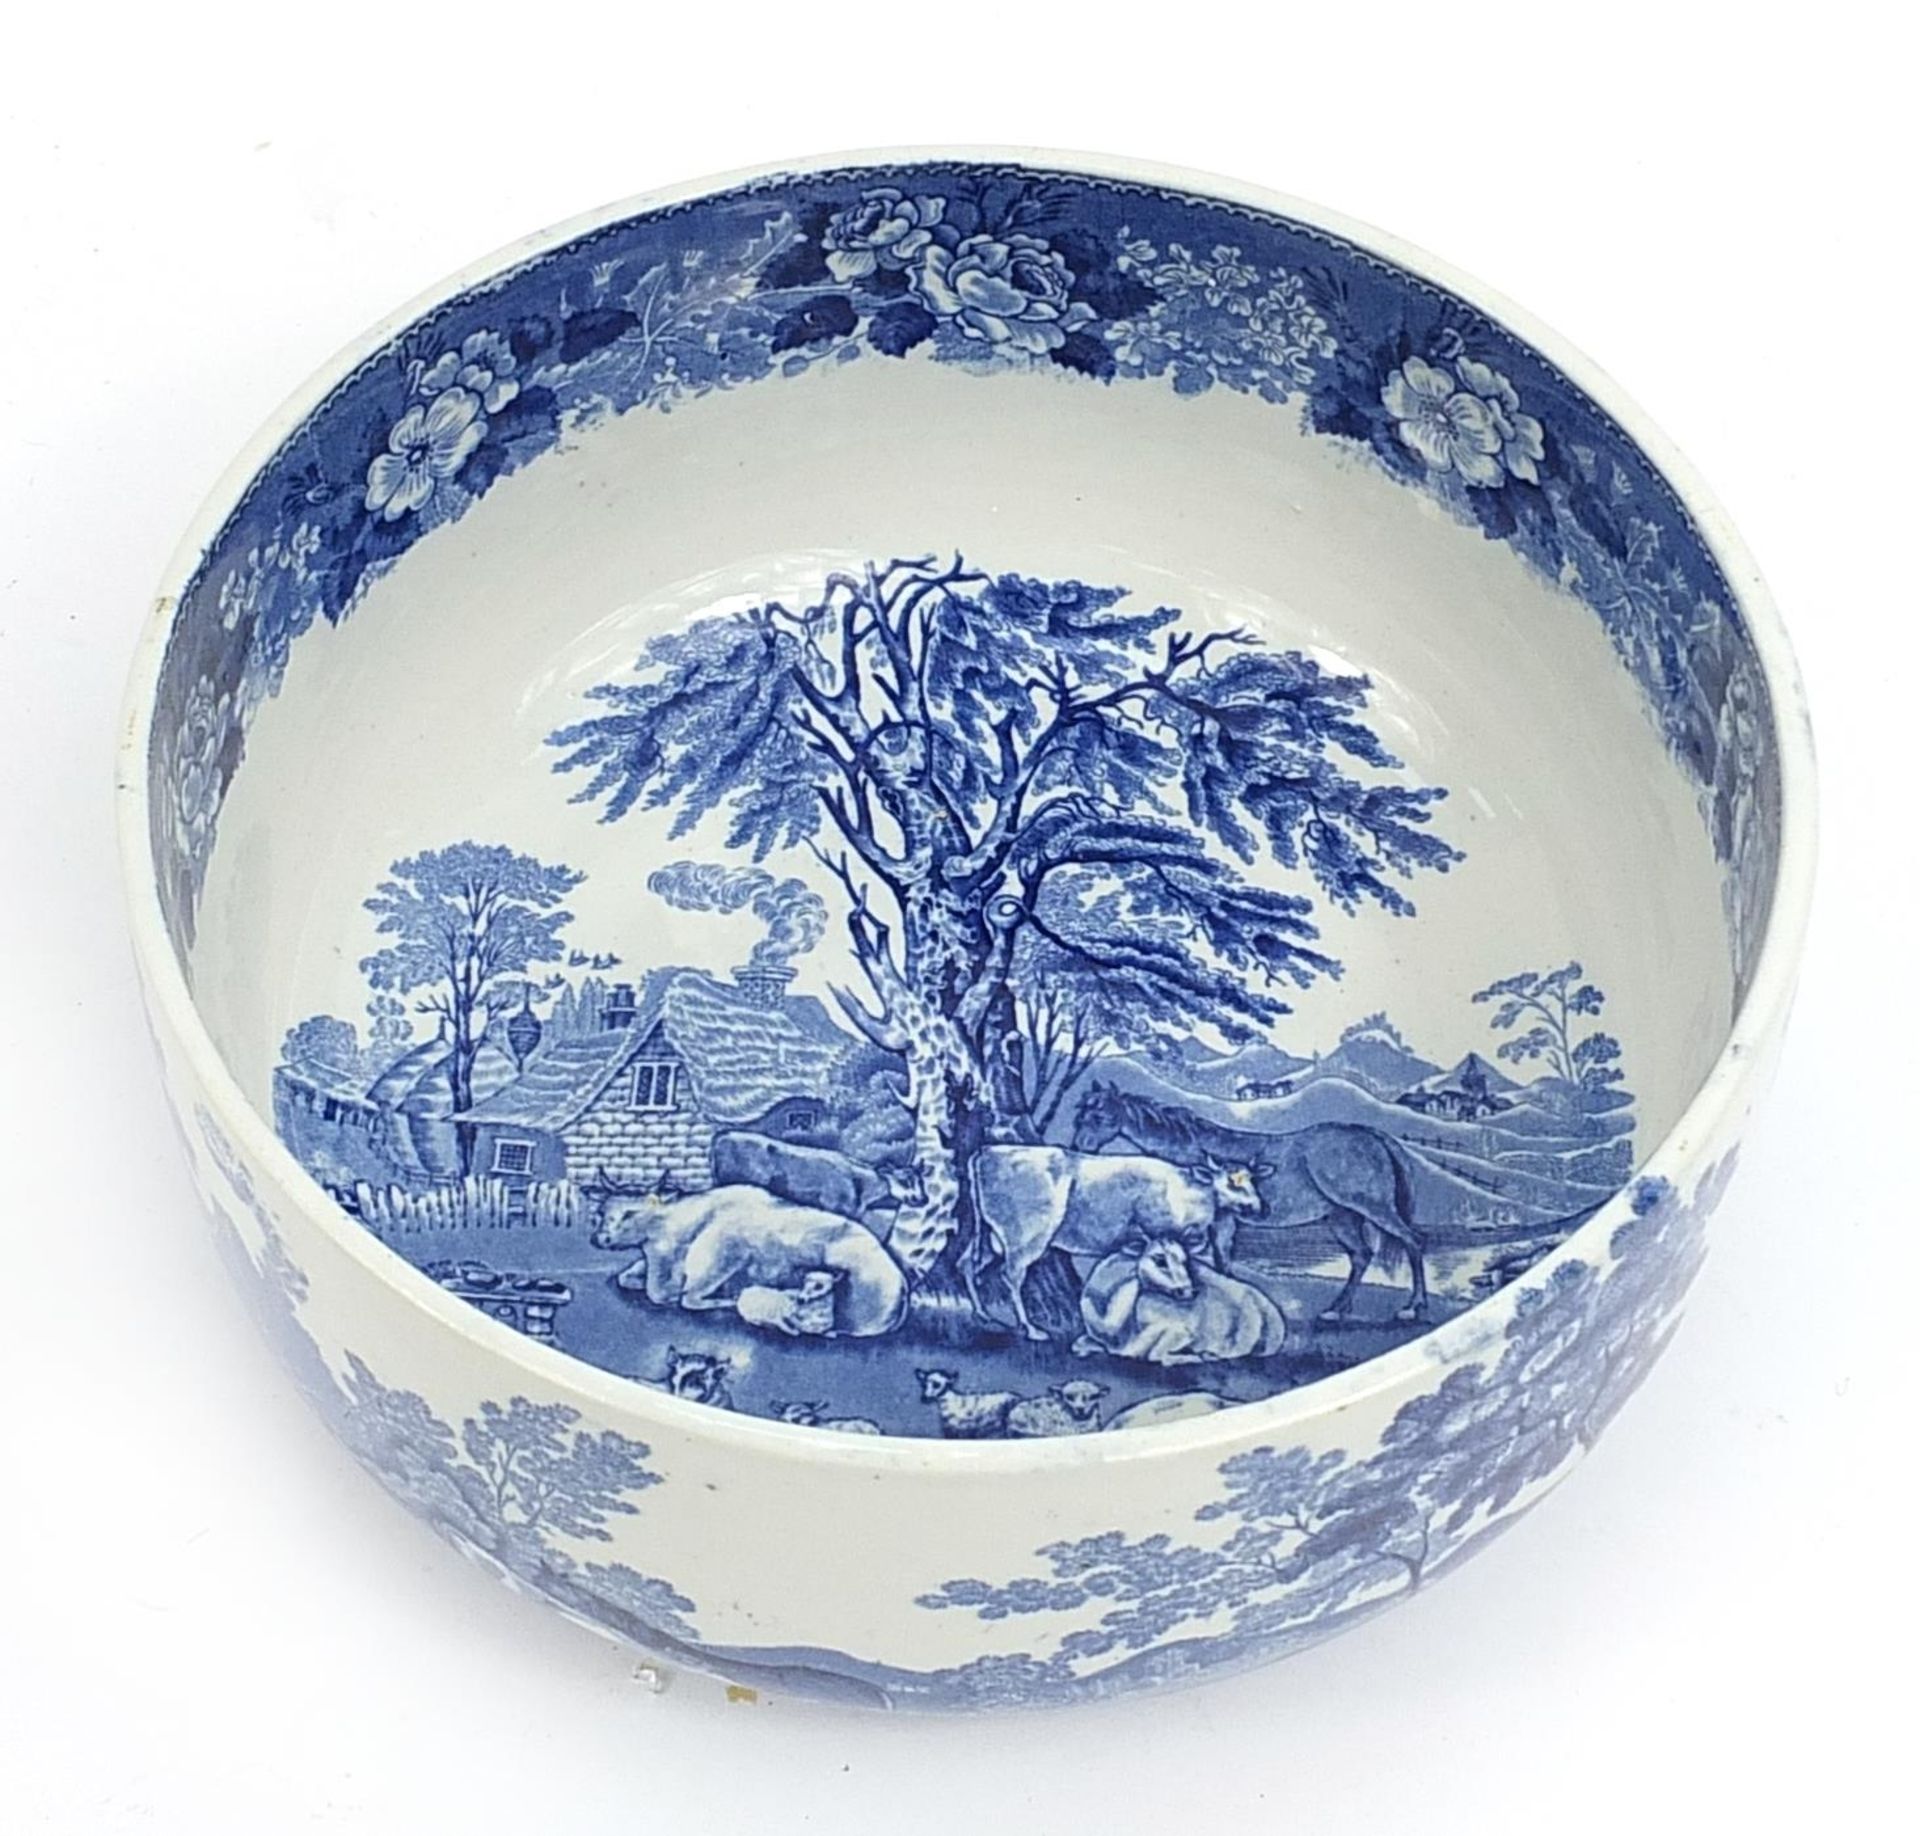 Adams pottery blue and white willow pattern fruit bowl, 24cm in diameter - Image 3 of 5